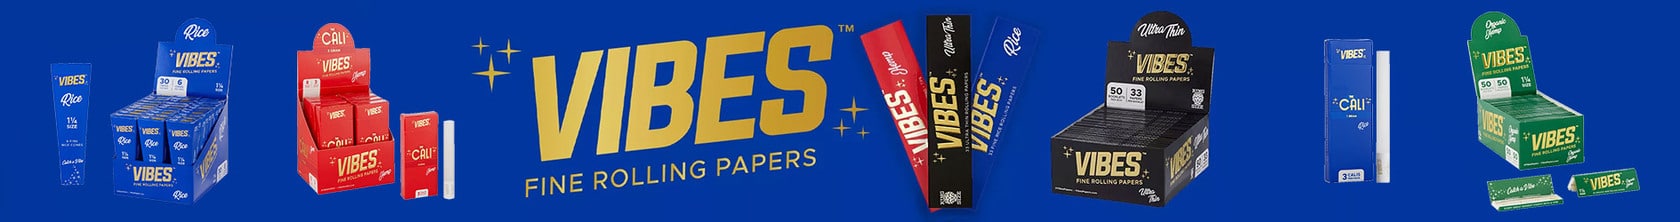 vibes-rolling-papers-banner-1888x250-70p-1680x222